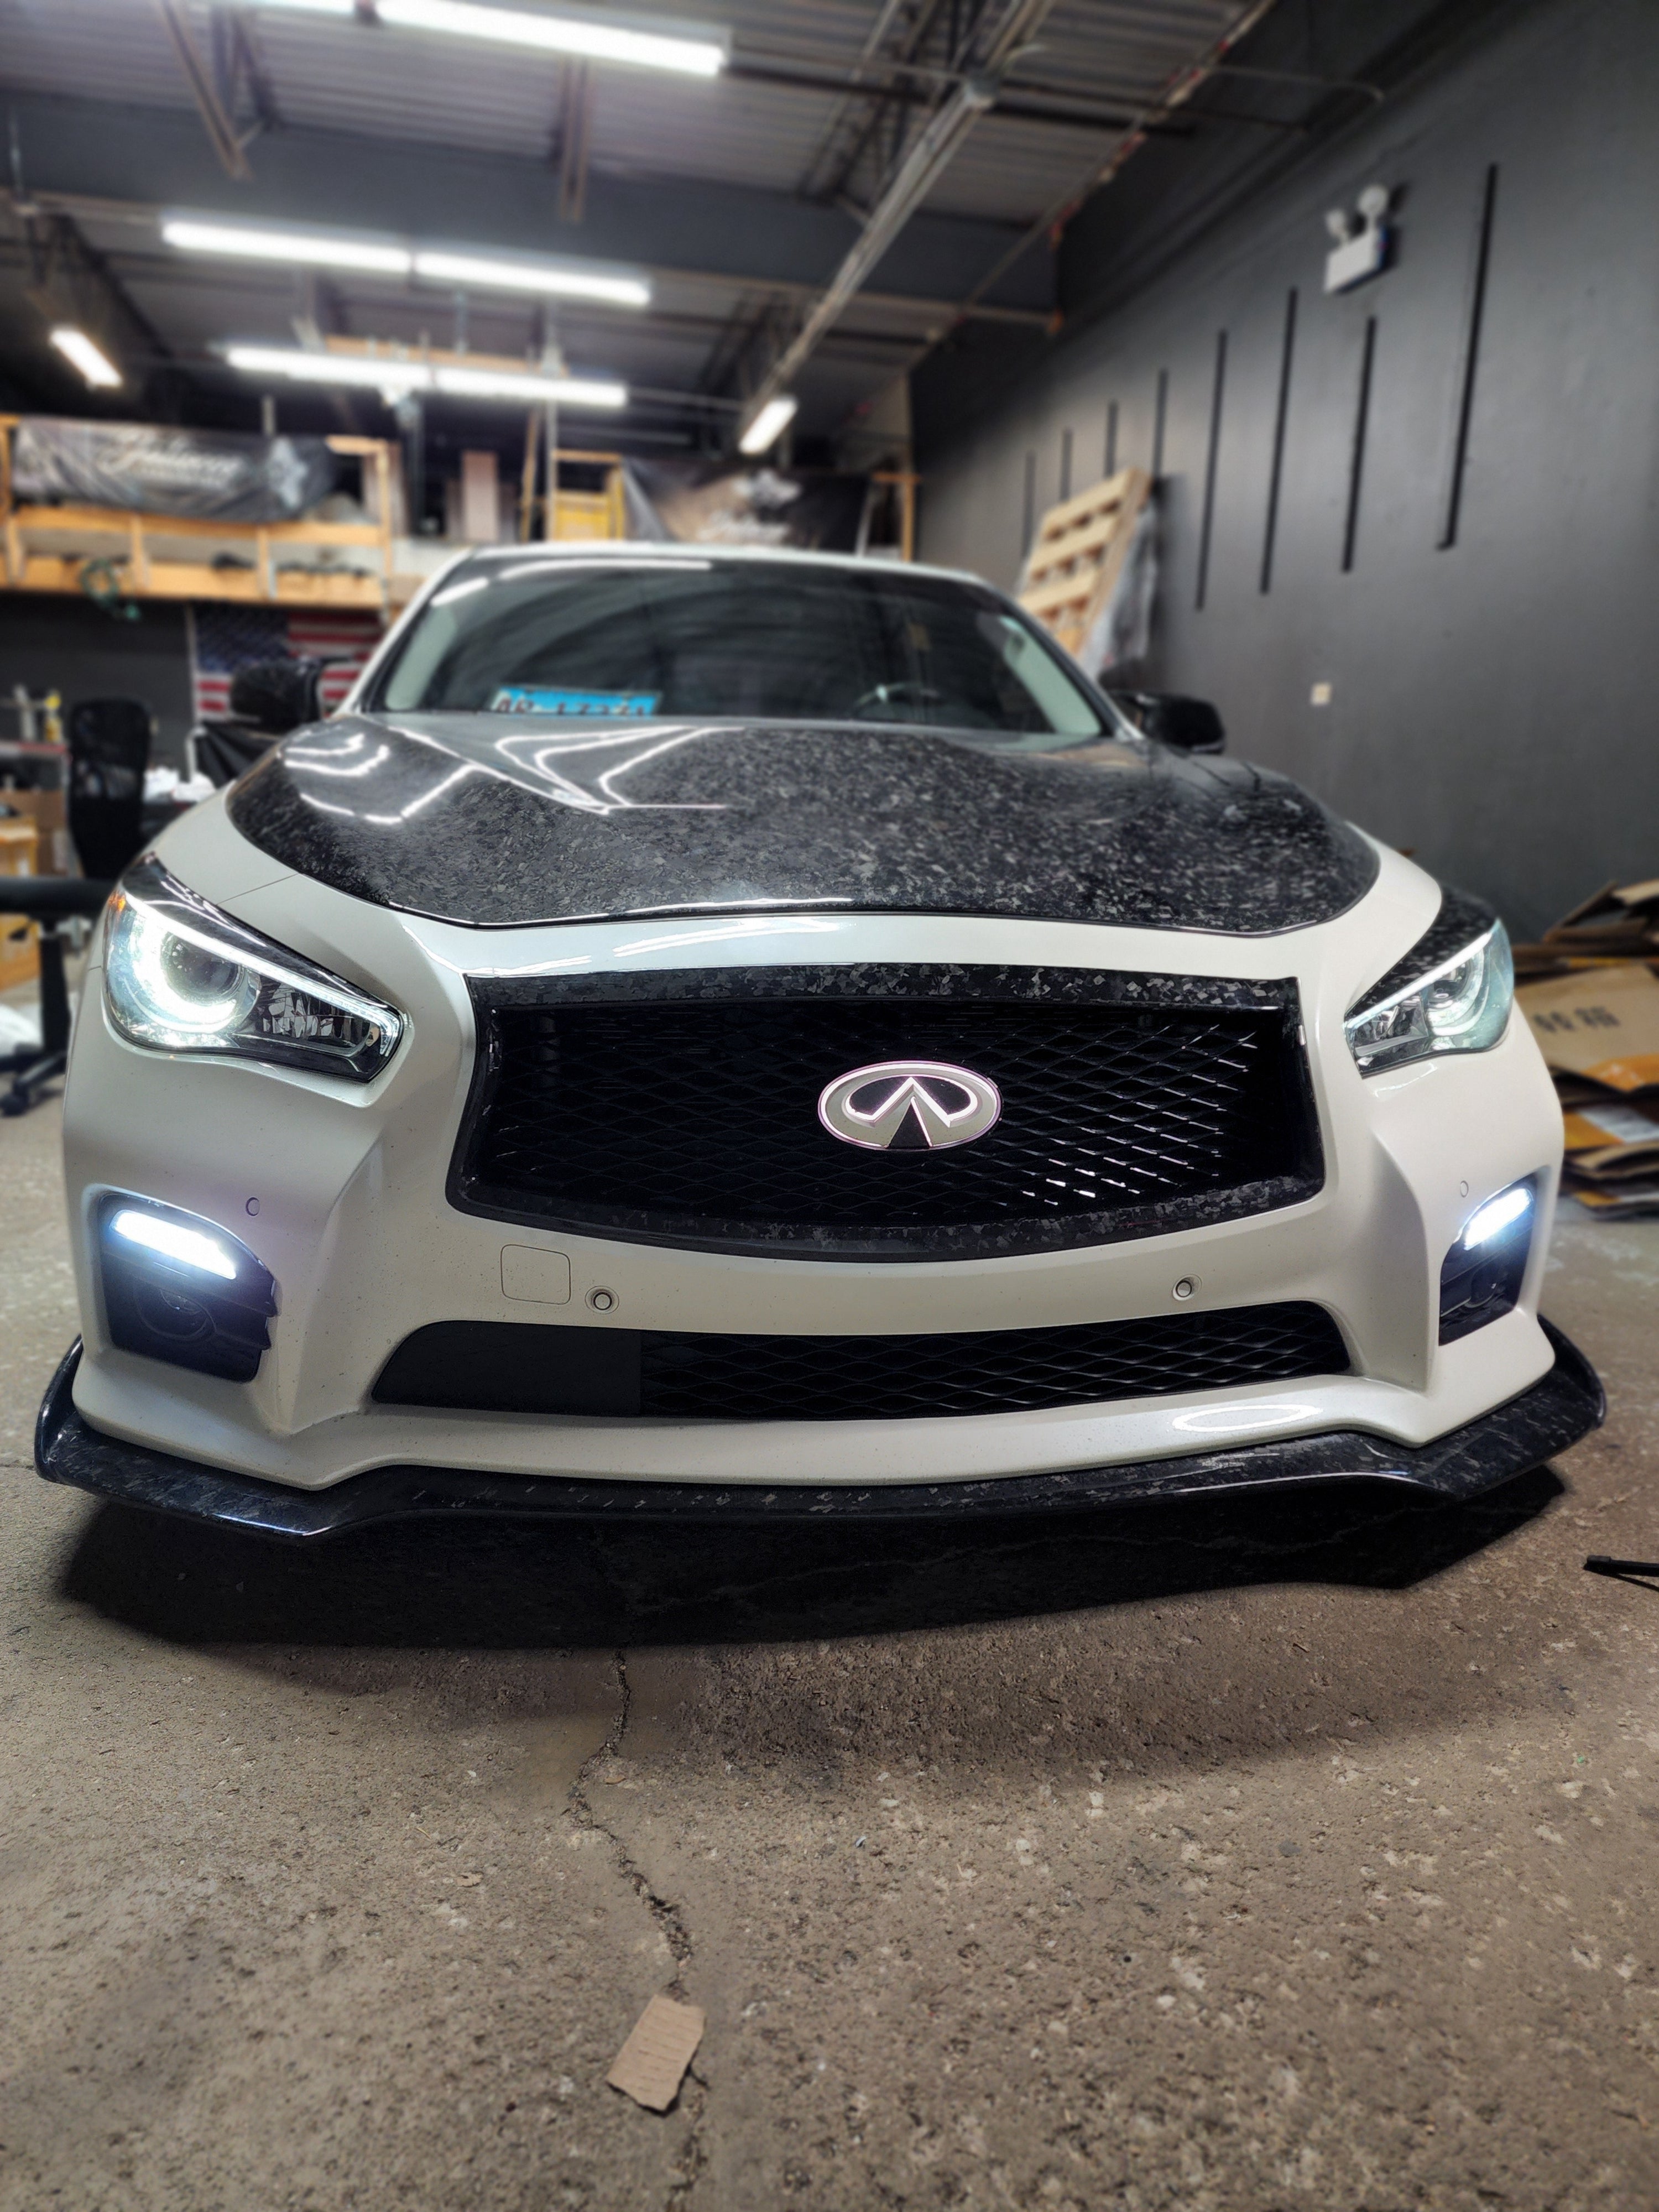 Real Carbon Fiber Eyelid Overlay for Infiniti Q60 2017+, highlighting the sleek design and fit on the headlight top section.